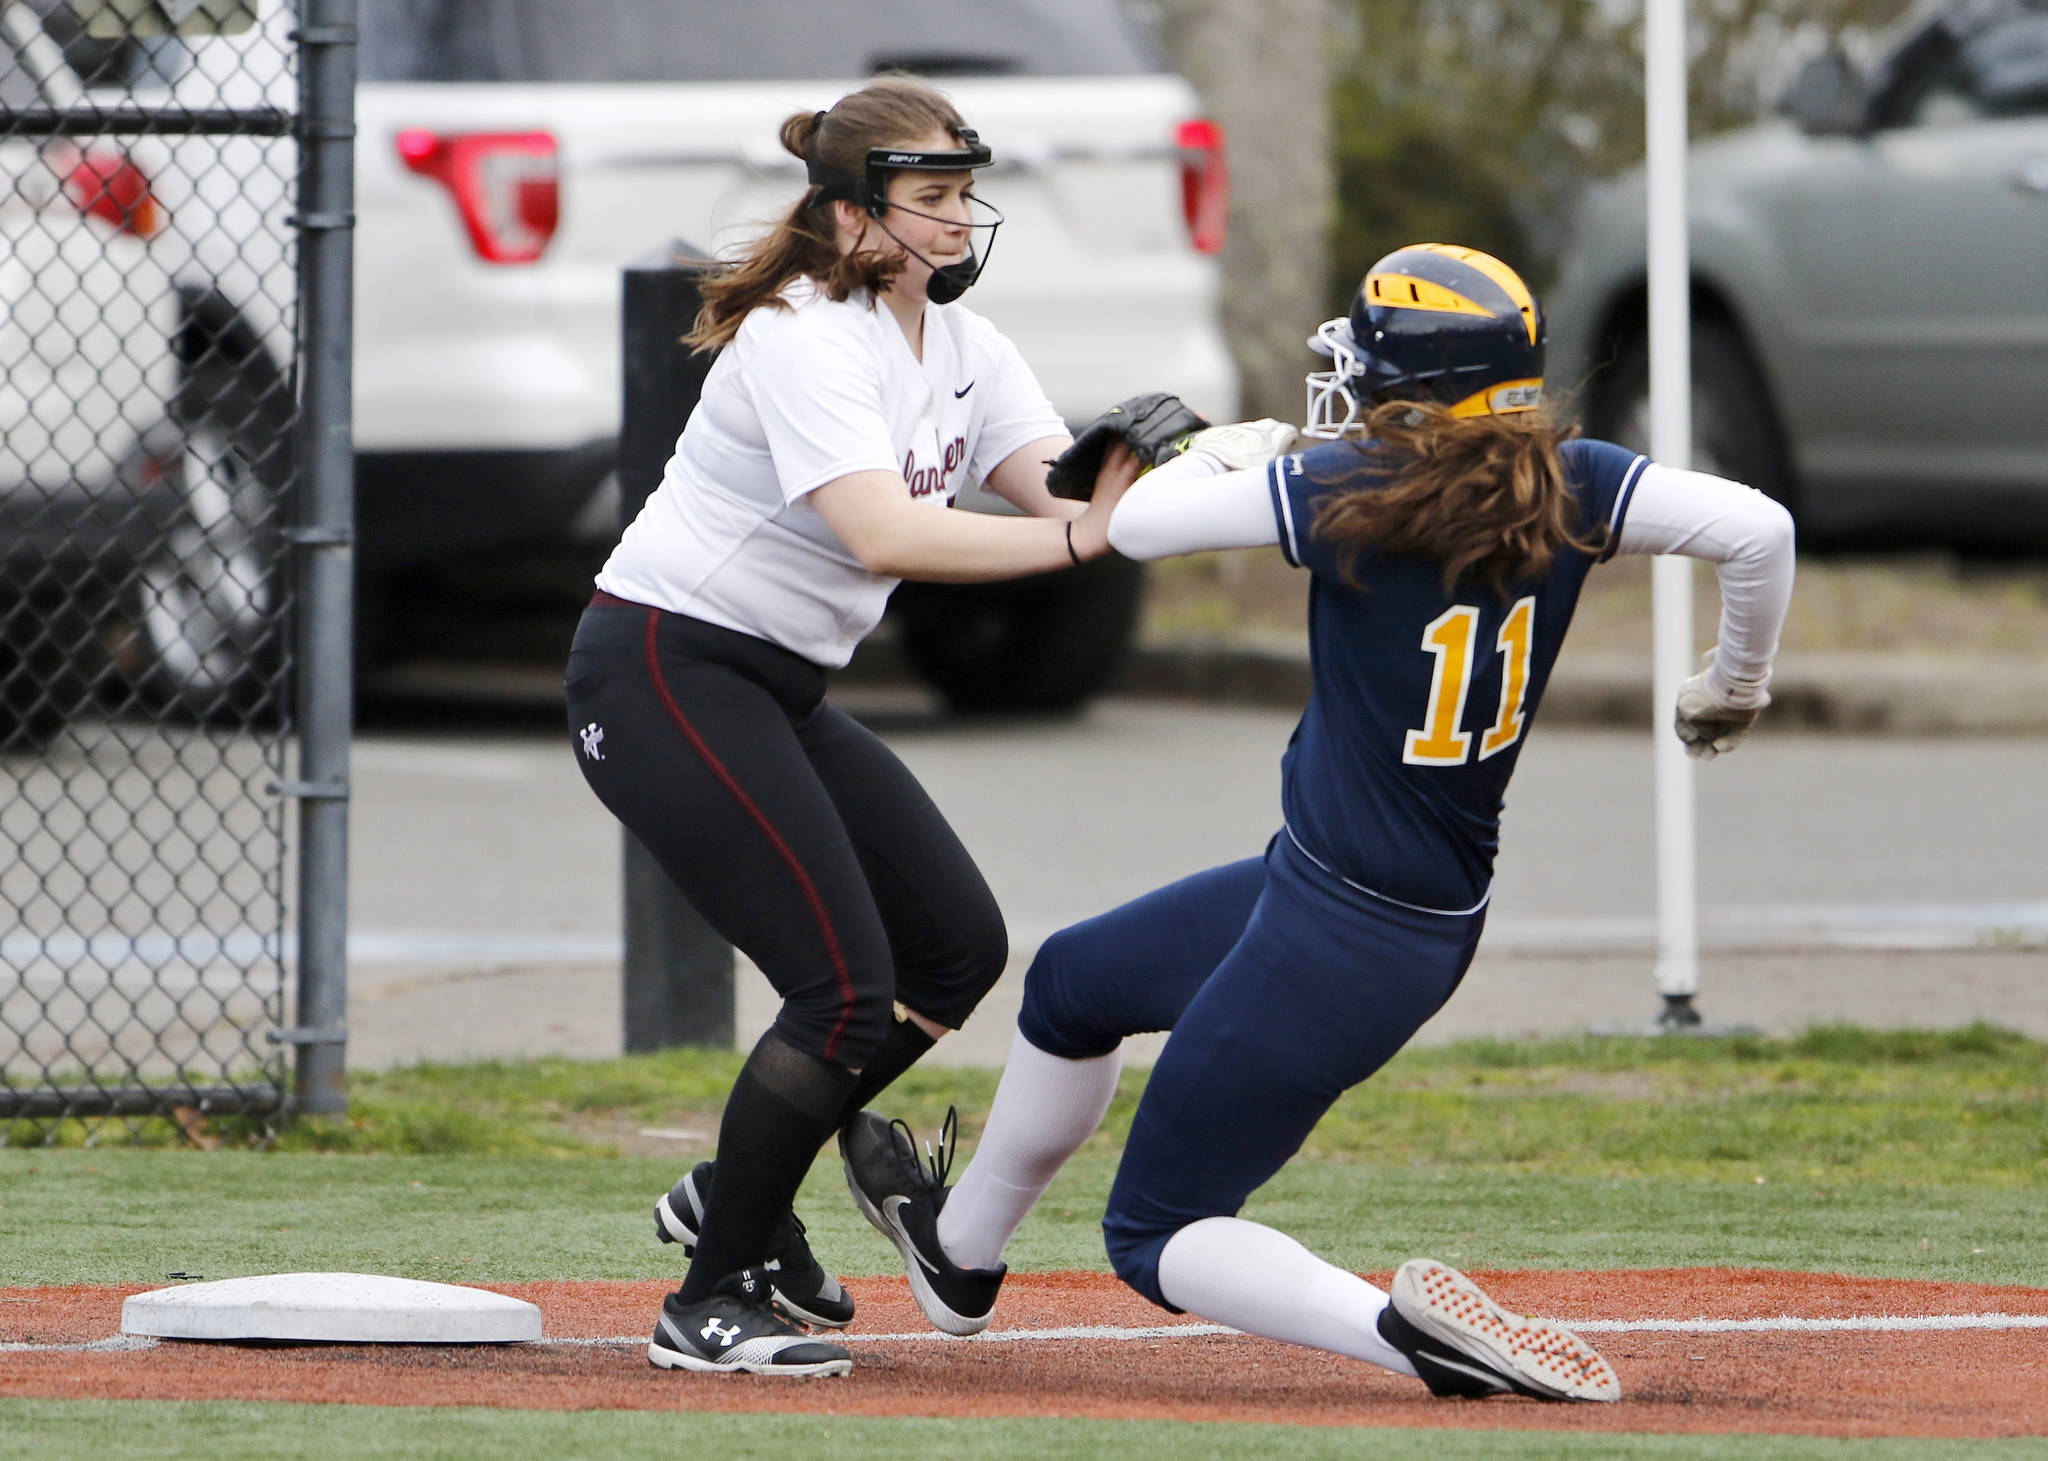 Mercer Island third baseman Caitlyn Barber, left, tags out Bellevue baserunner Rachel Treves, right, during a matchup between rivals on April 3 at the South Mercer playfields. Bellevue defeated Mercer Island, 35-0. Photo courtesy of Jim Nicholson